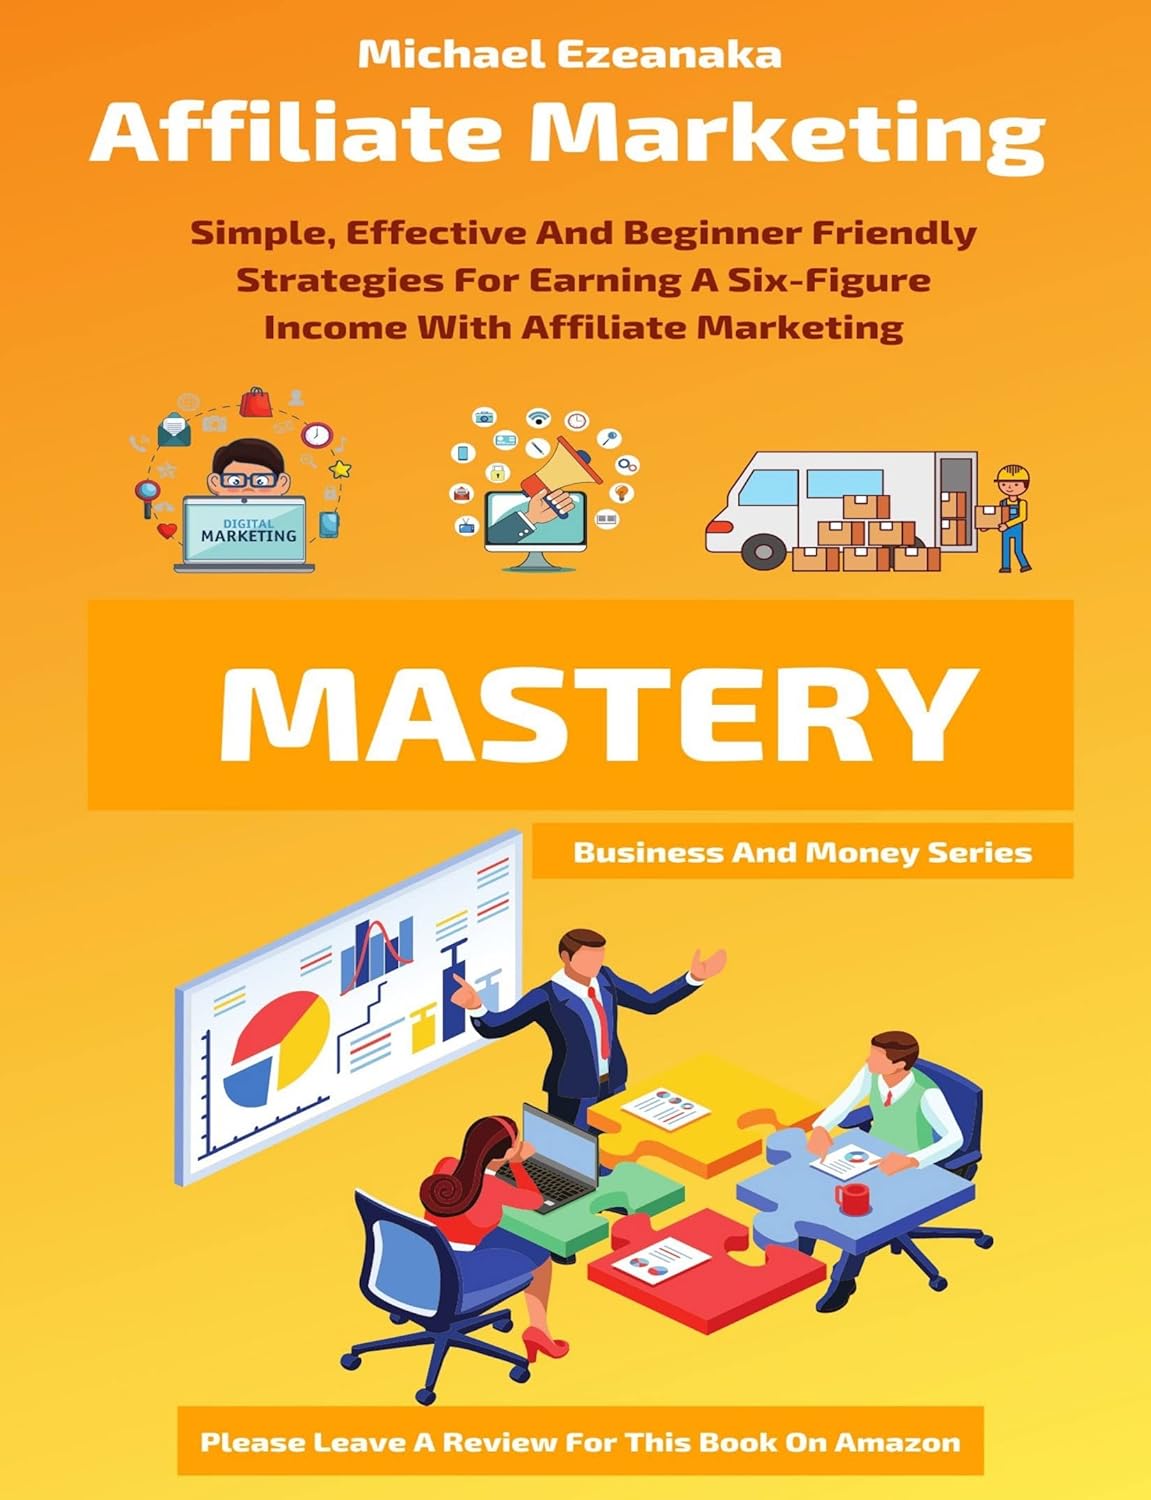 Affiliate Marketing Mastery Review.